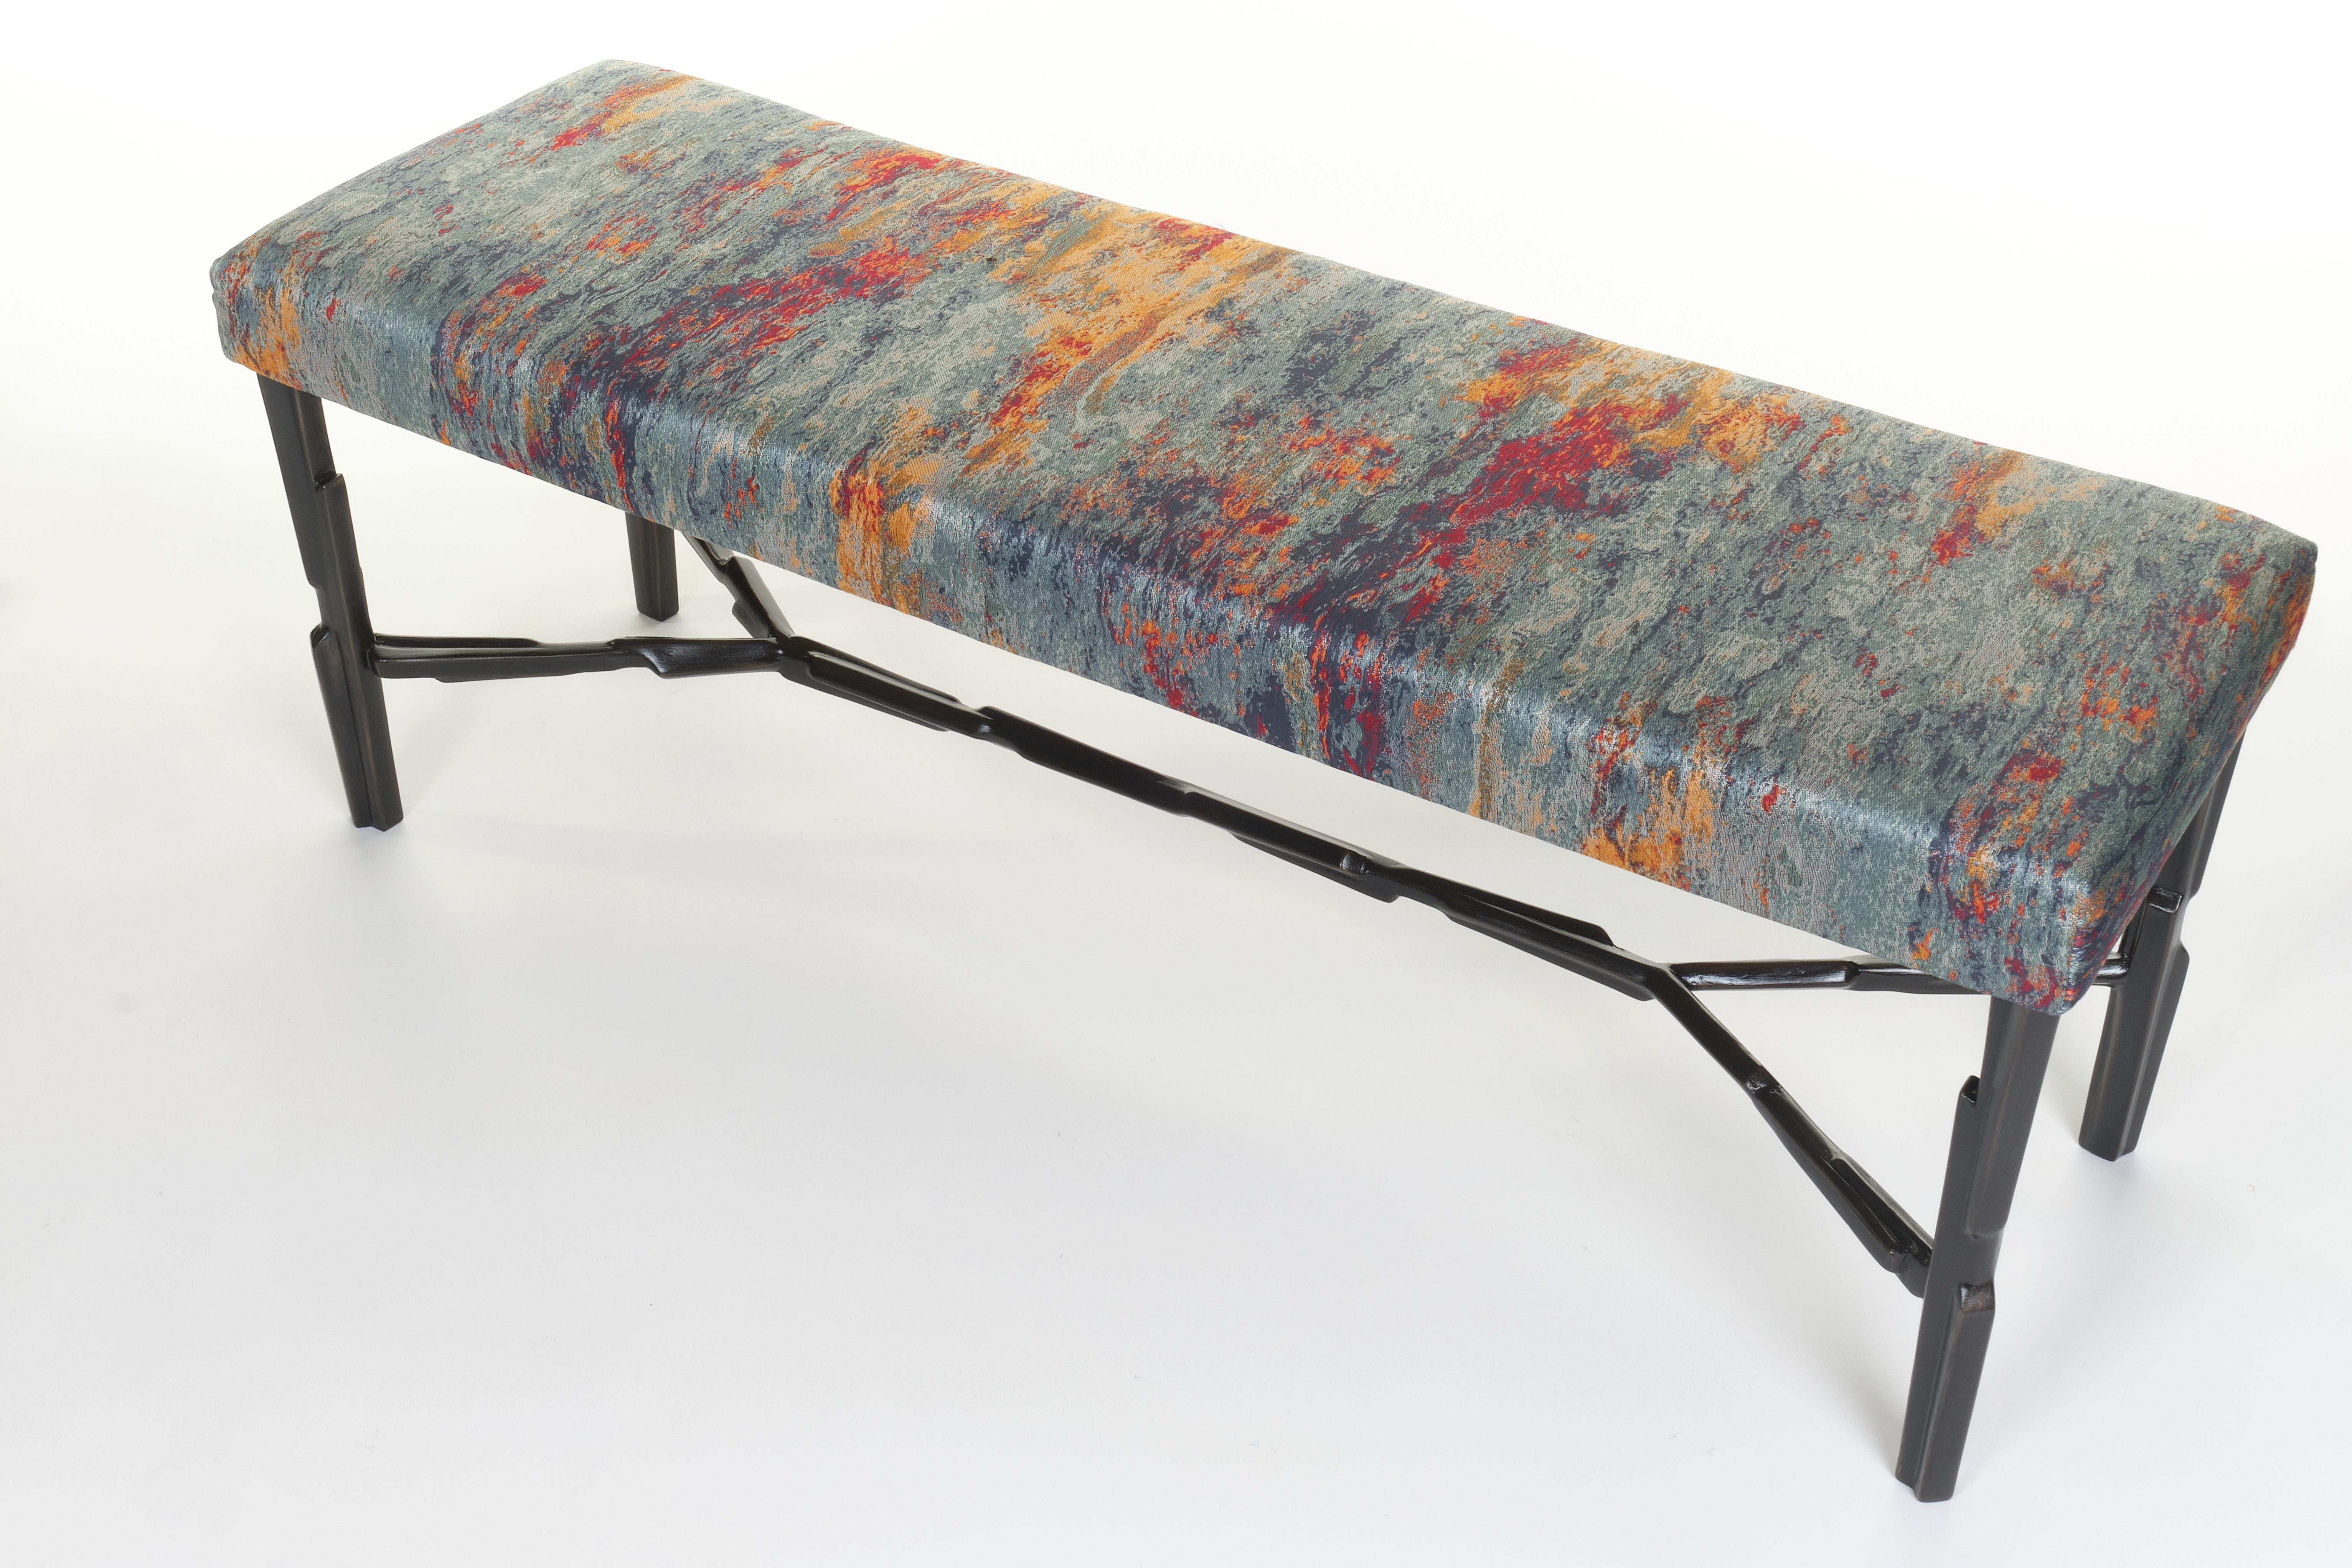 Linea bench is characterised by a hand-worked feet finished in bronzed plaster with an upholstered seat pad available in a range of ten jacquard fabrics from the ,,Second Firing” series, designed by Peter Marino for Rubelli. These unique of their